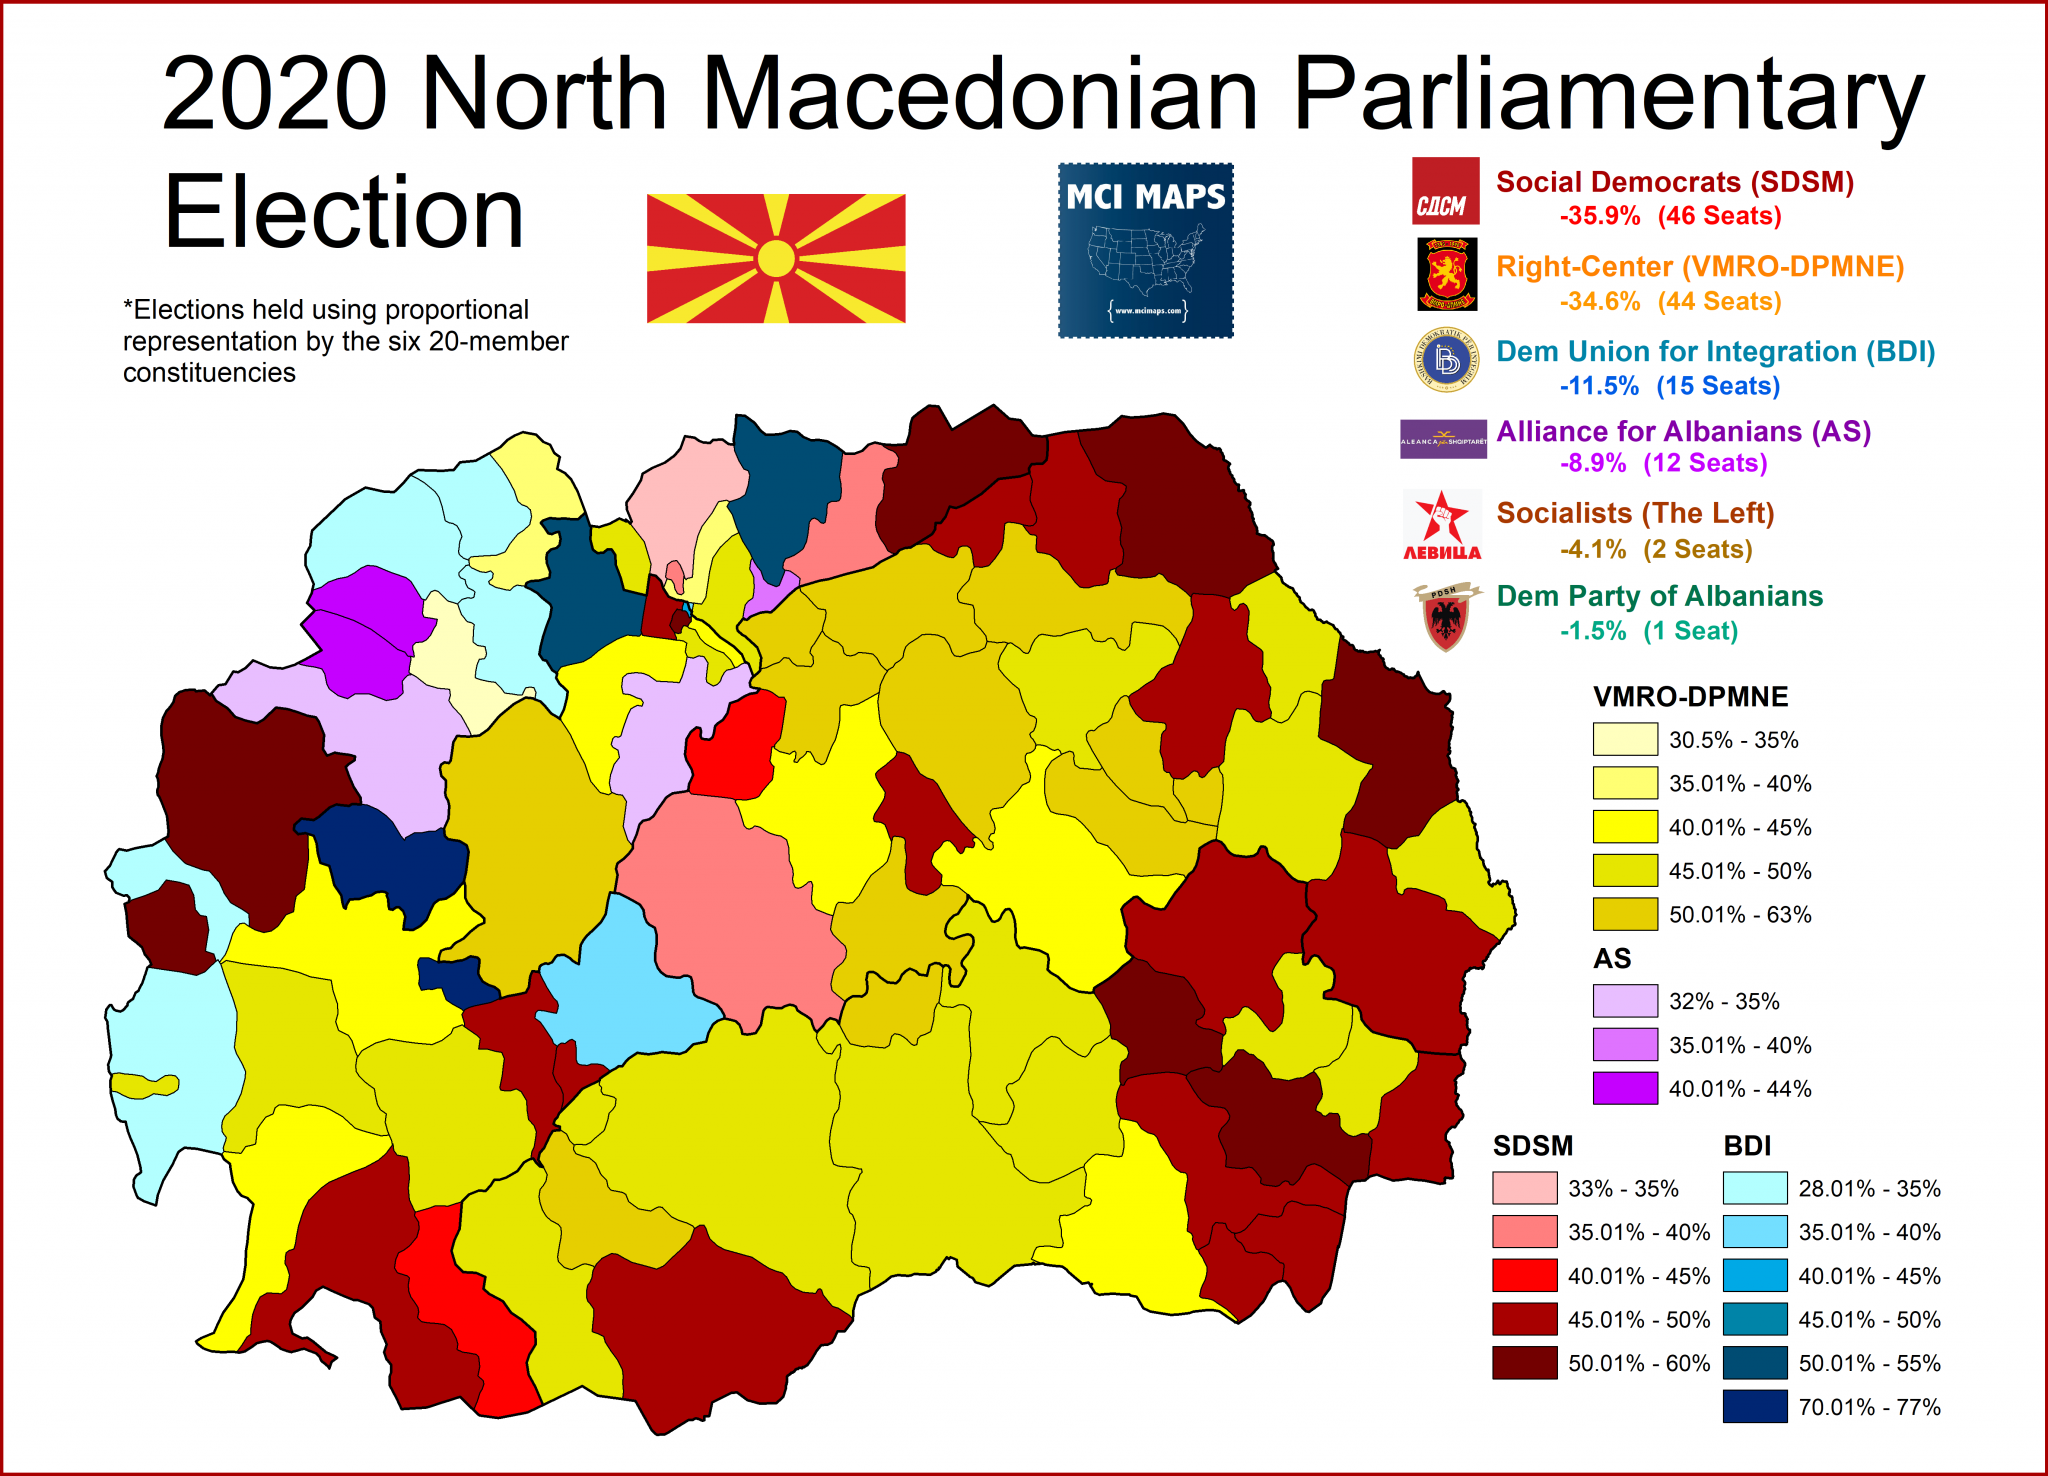 A look at the Balkans and The Republic of “North” Macedonia MCI Maps